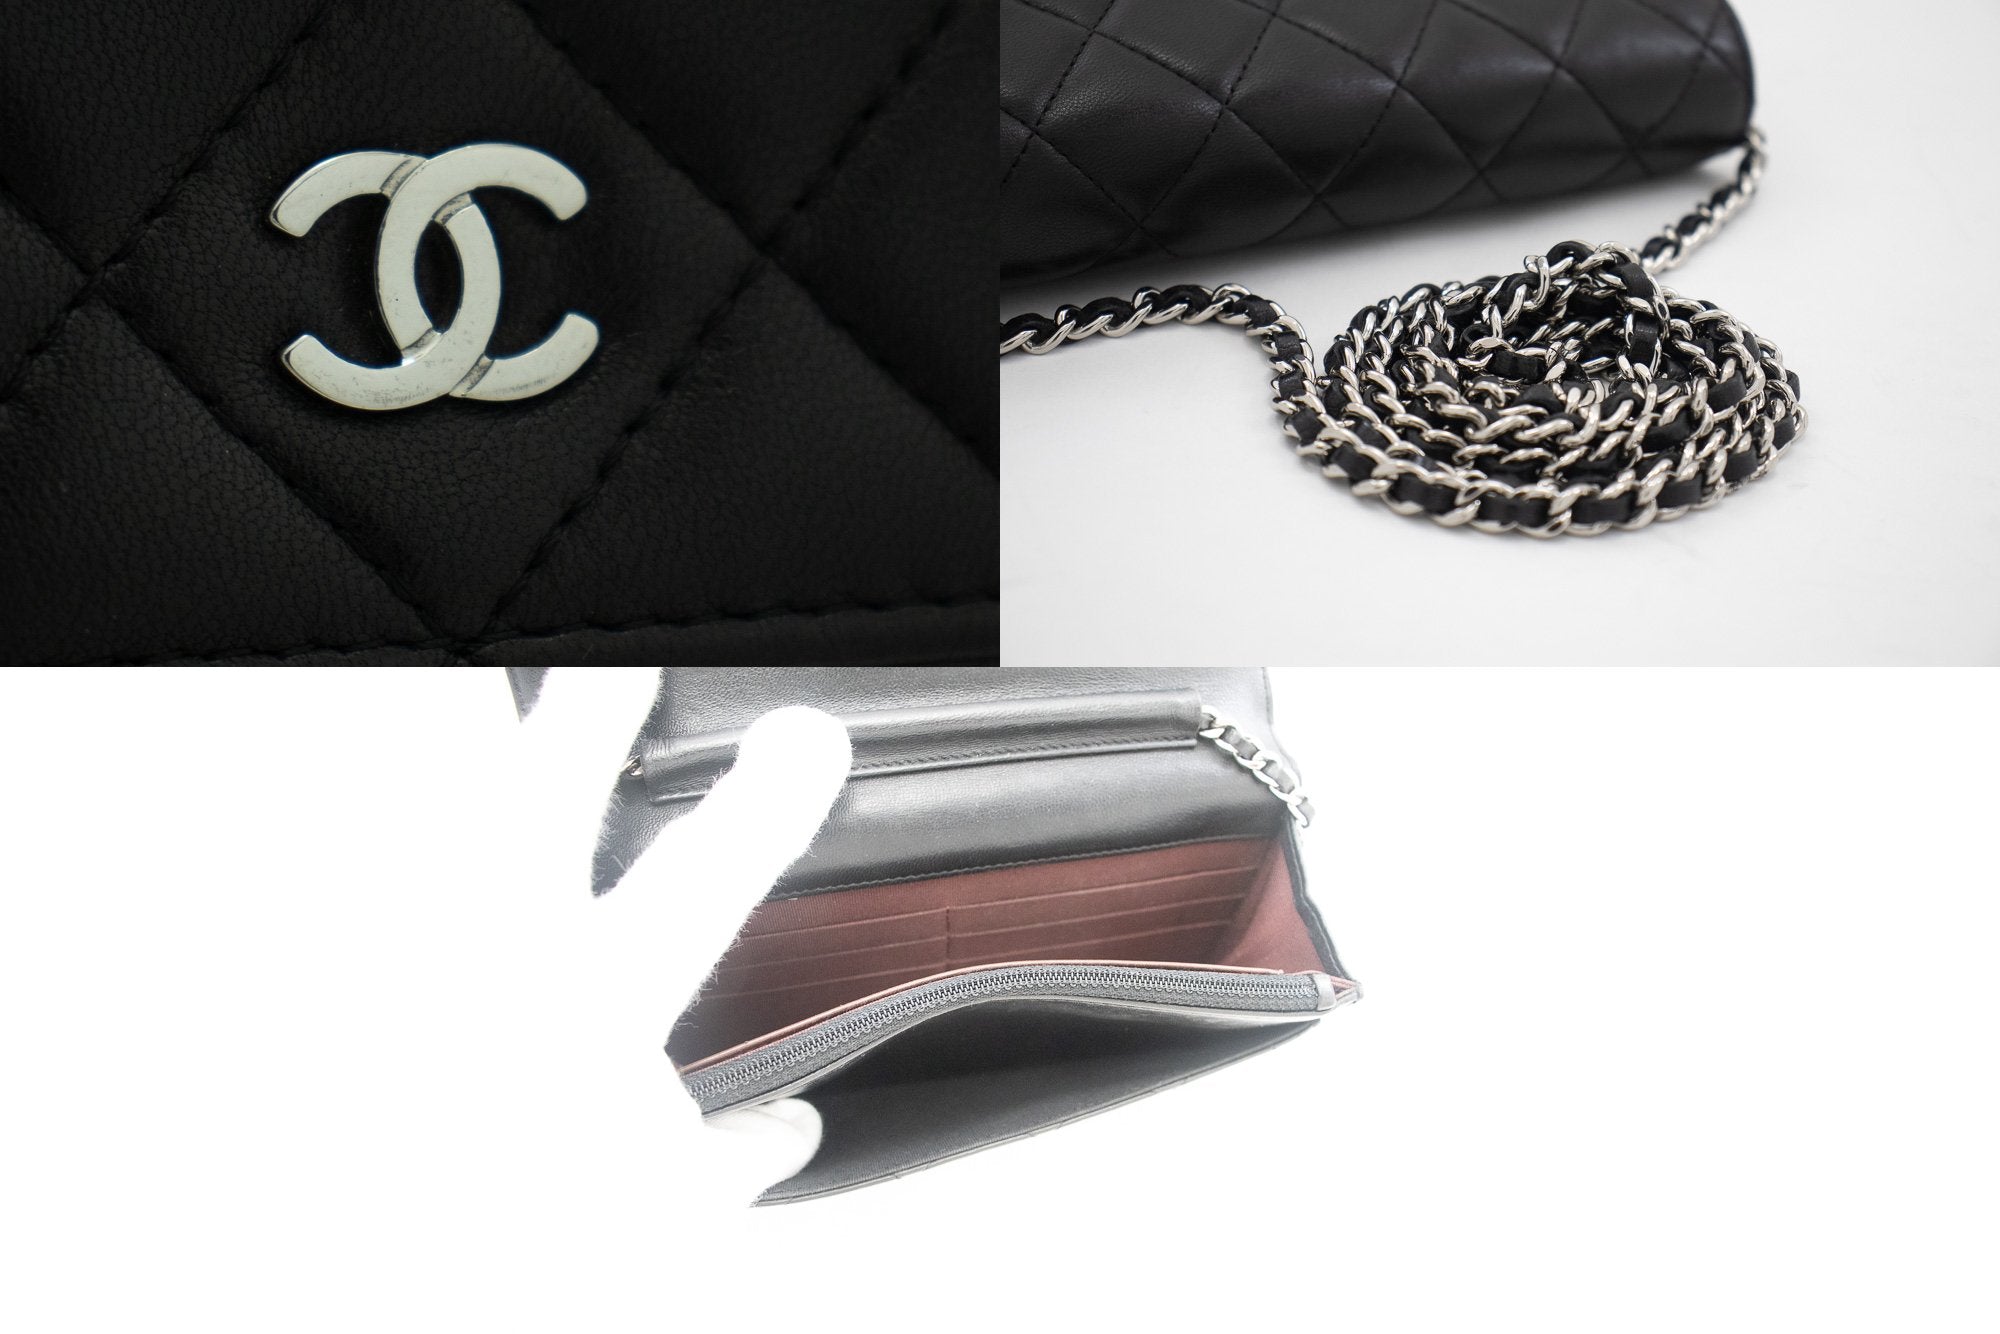 Chanel Vintage Black Quilted Full Flap Wallet On Chain Lambskin & COA